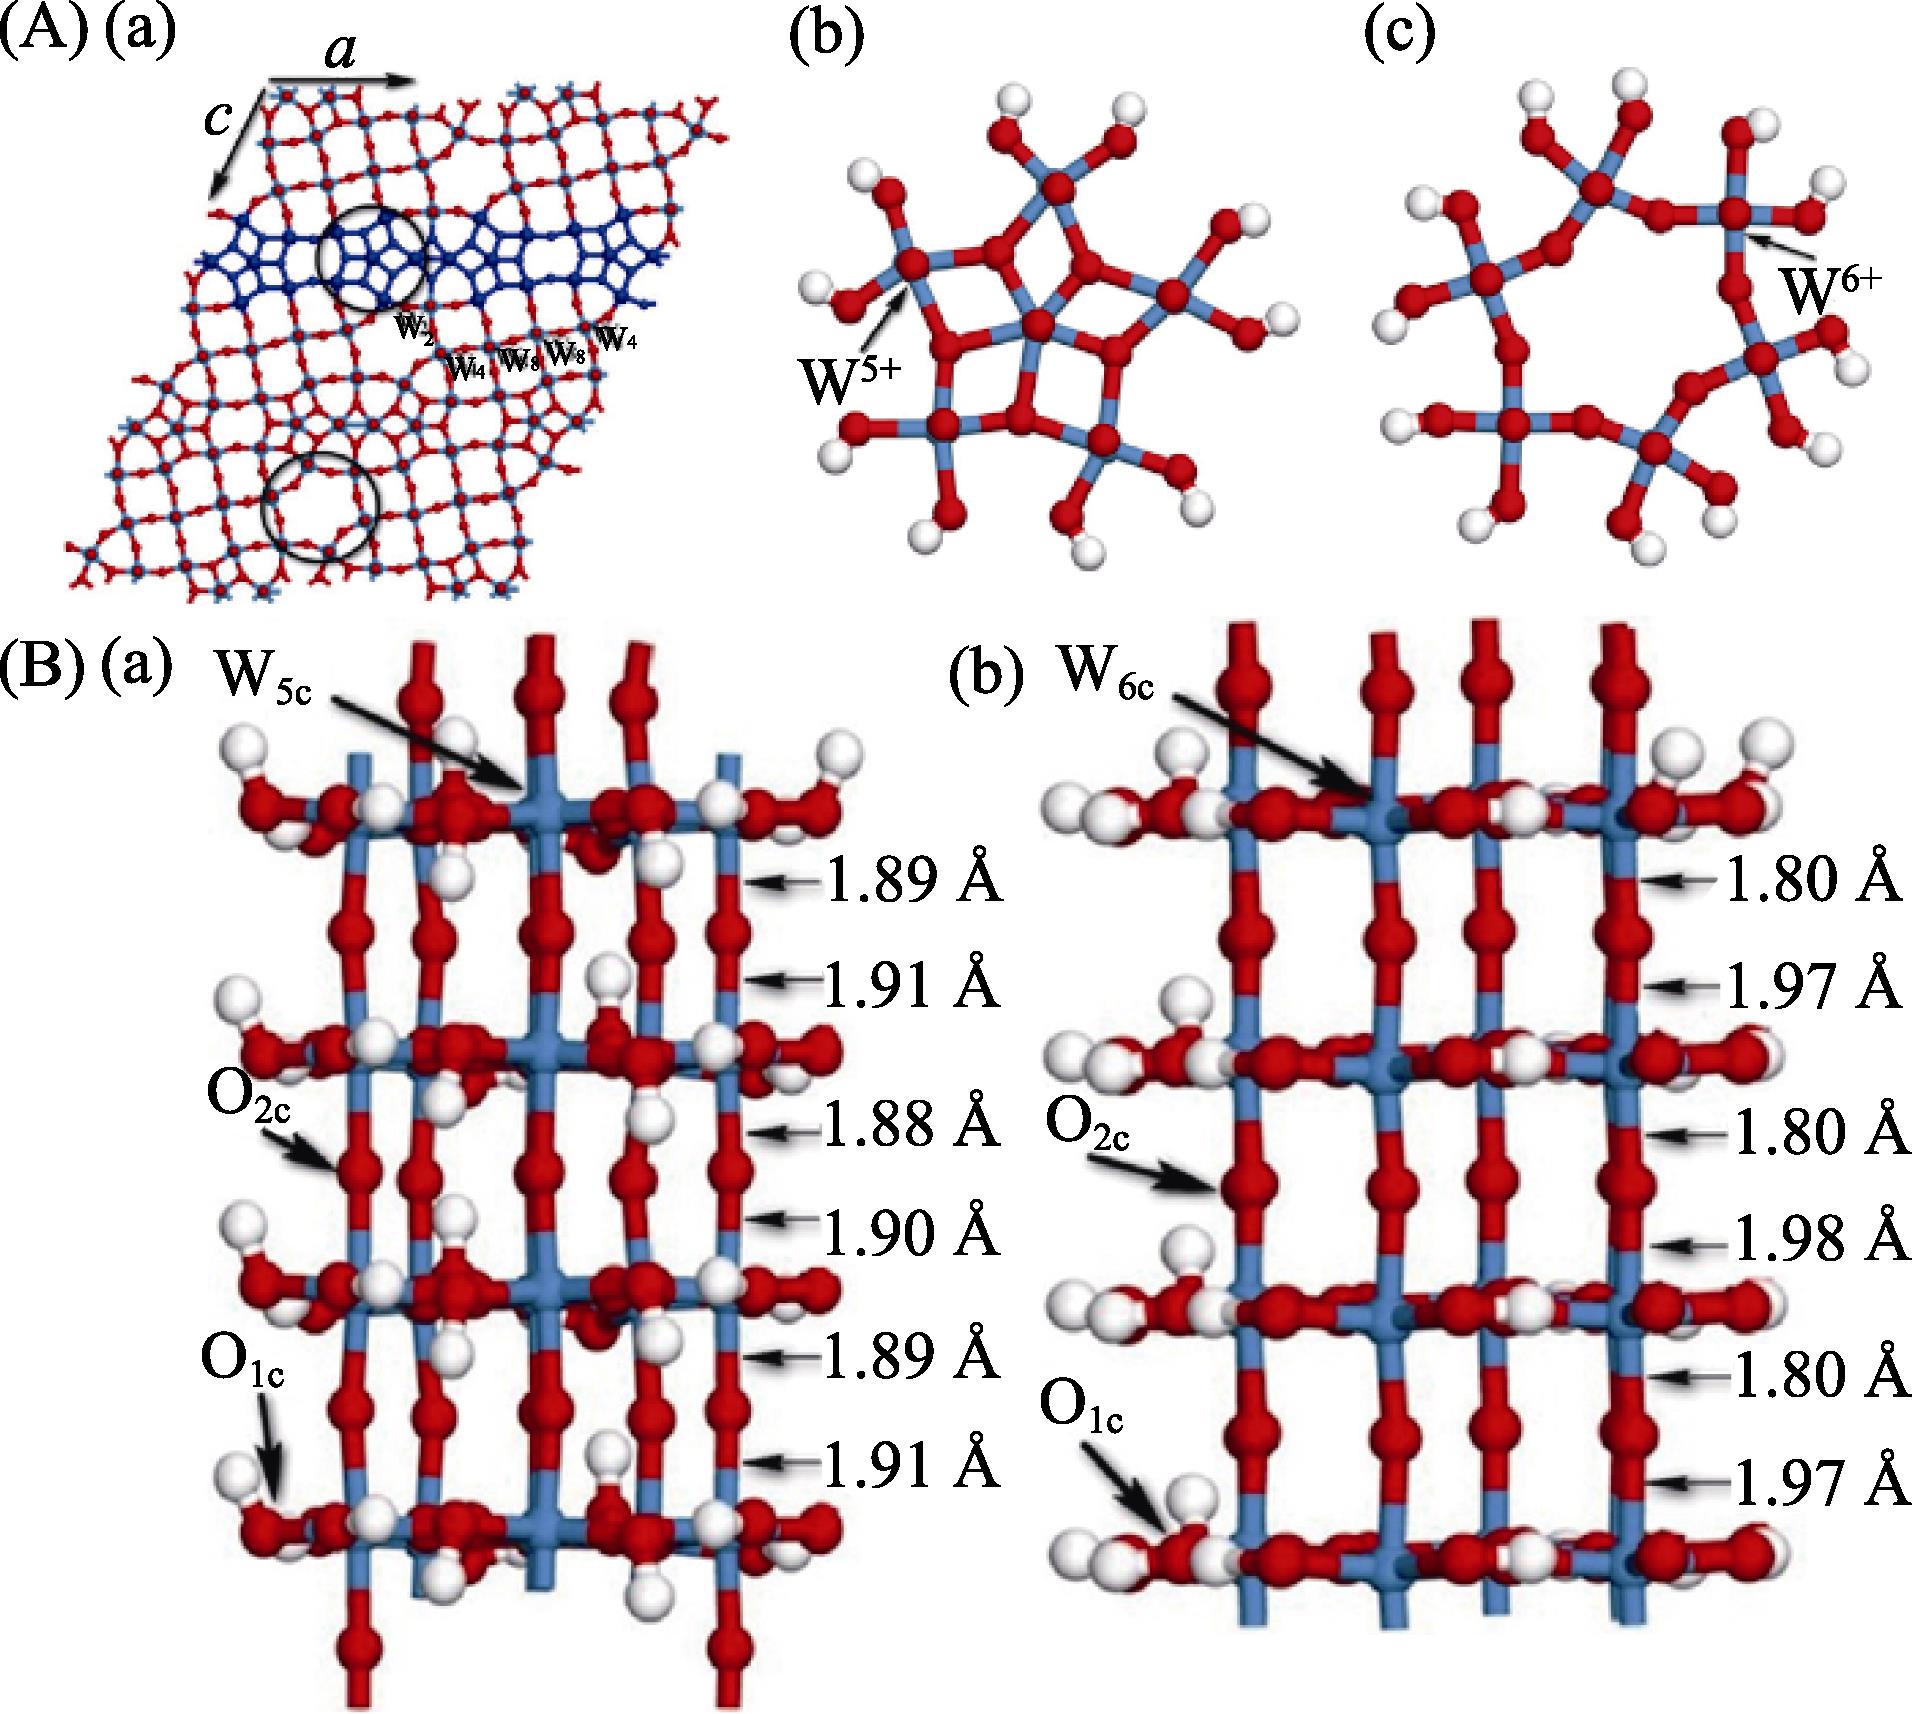 (A) Monoclinic structure (a) of W18O49 nanowires supercell model and its top views of NW1(b) and NW2(c), where NW1 and NW2 include largely cations W5+ and cations W6+, respectively; (B) Optimized models for NW1 (a) and NW2 (b), of W18O49 (010) nanowires[24, 61-62].